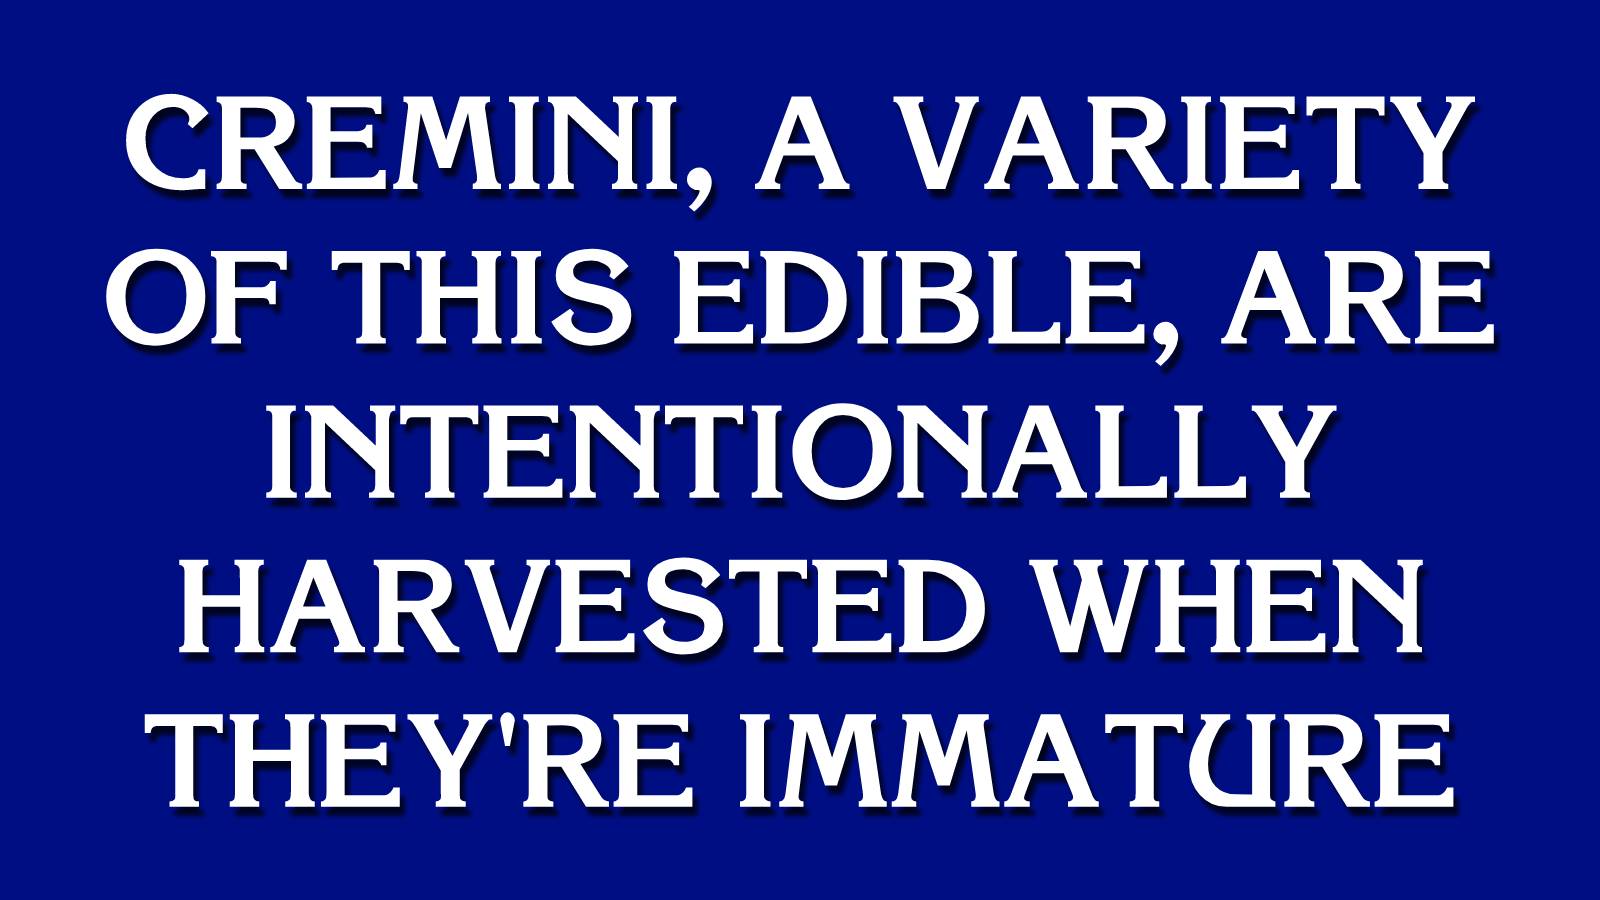 Do You Have the Smarts to Win This Game of “Jeopardy!”? Template Jeopardy 141